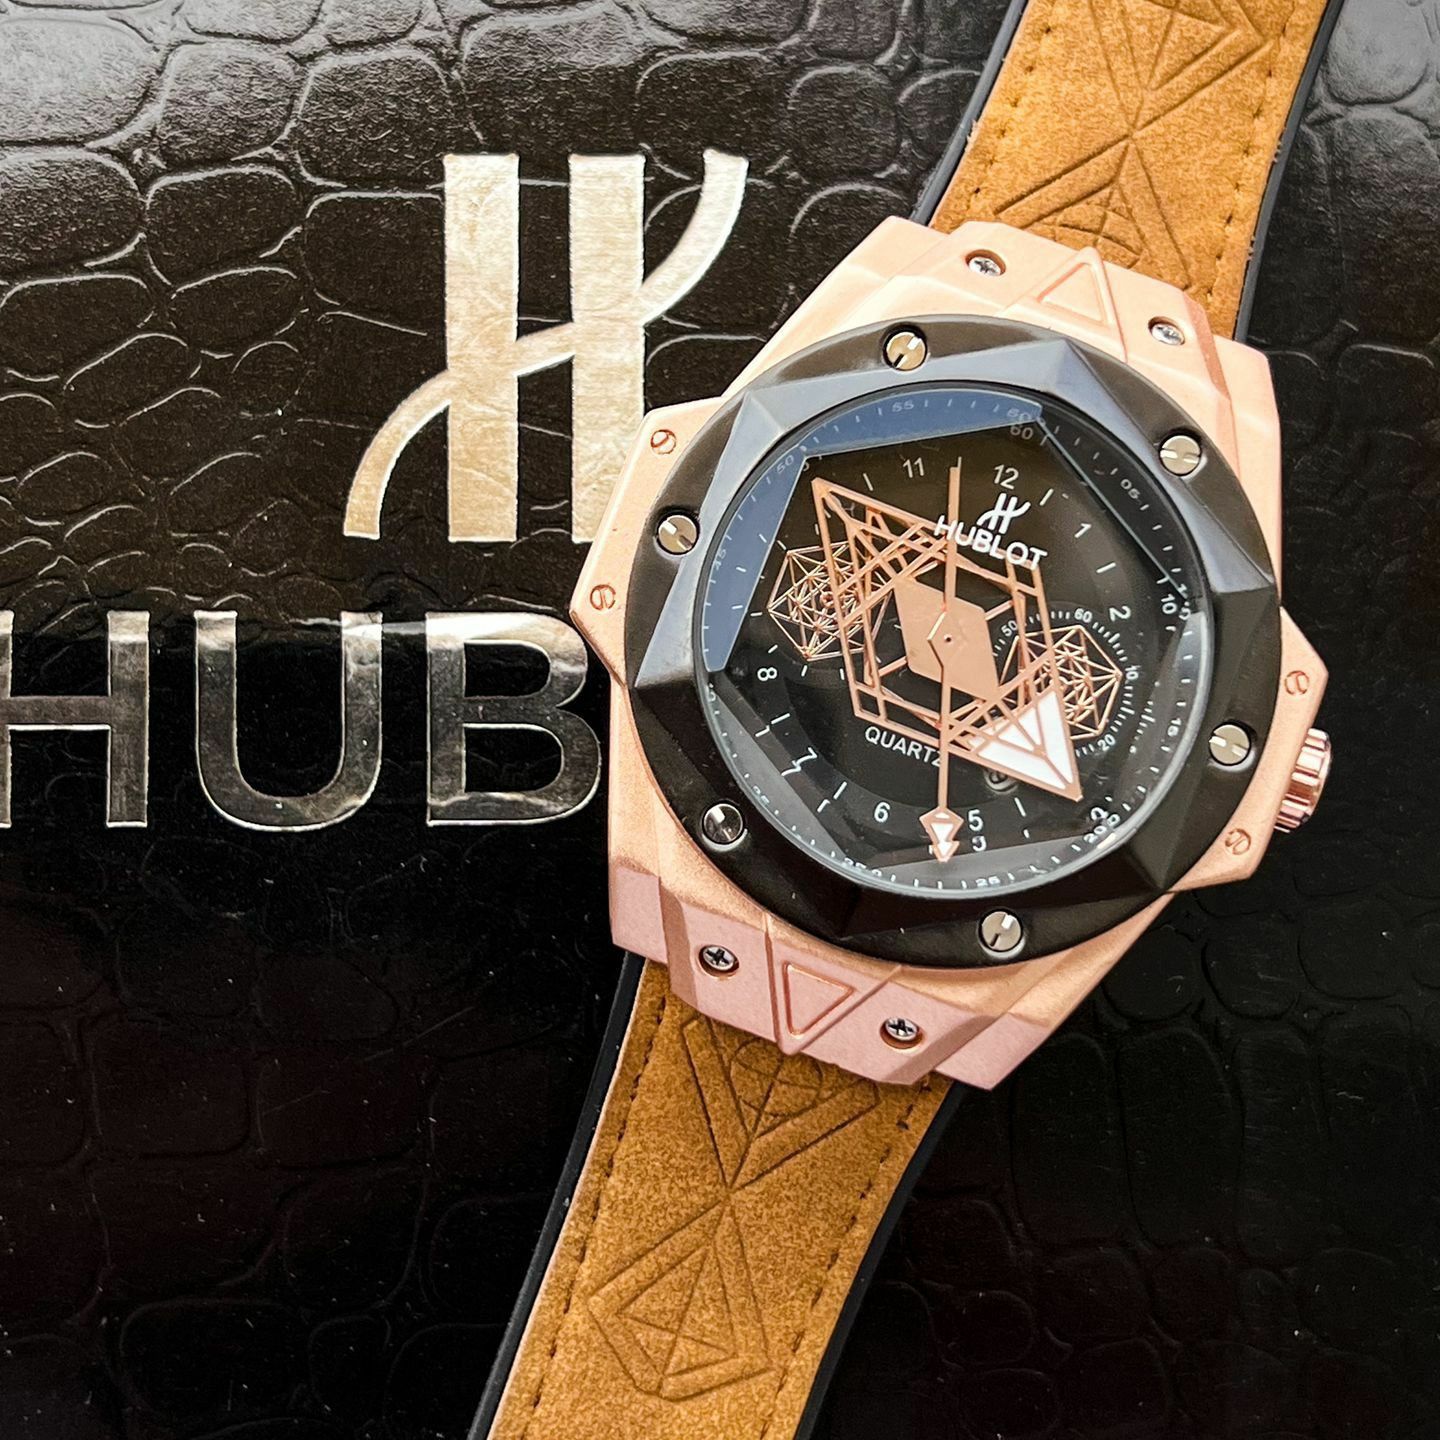 Interview: Ricardo Guadalupe, CEO of Hublot